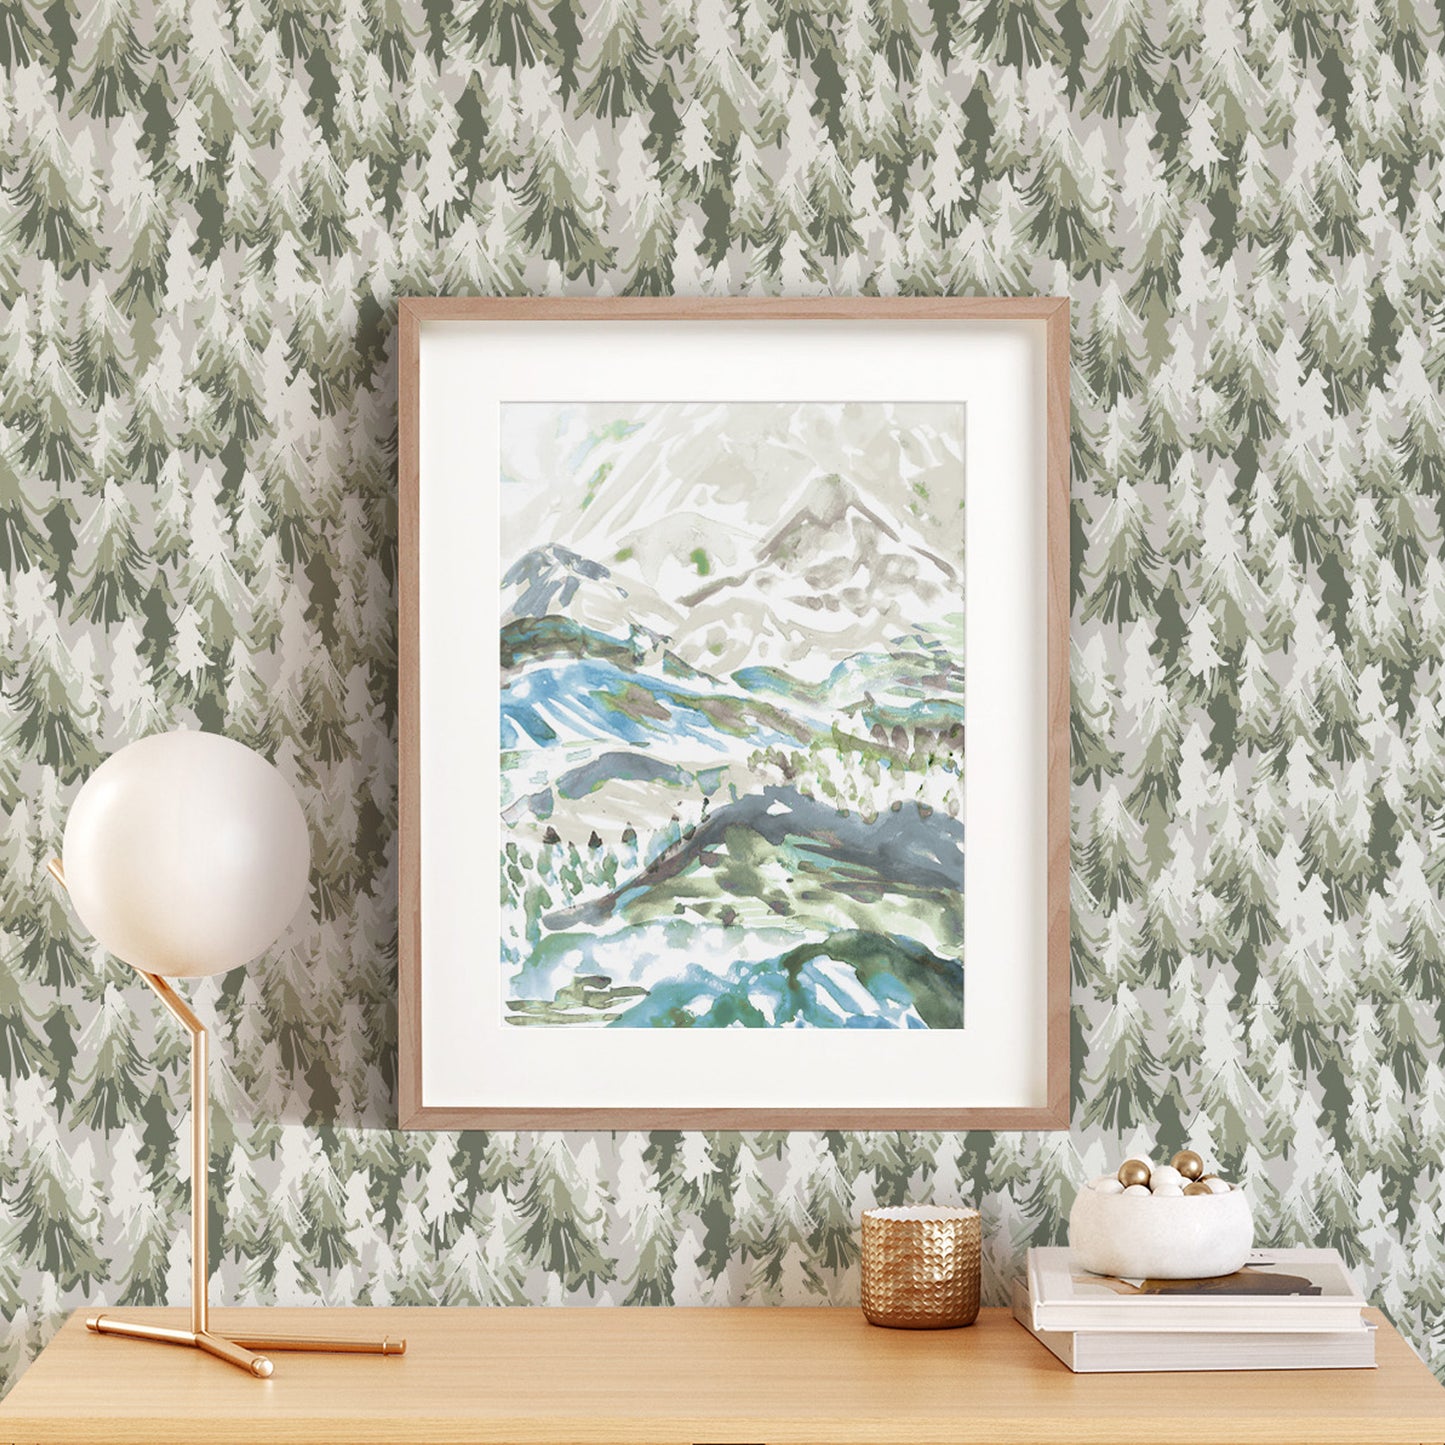 Our Mountains art print features a beautiful combination of nature's colors in a creative way that will bring adventure to any room!